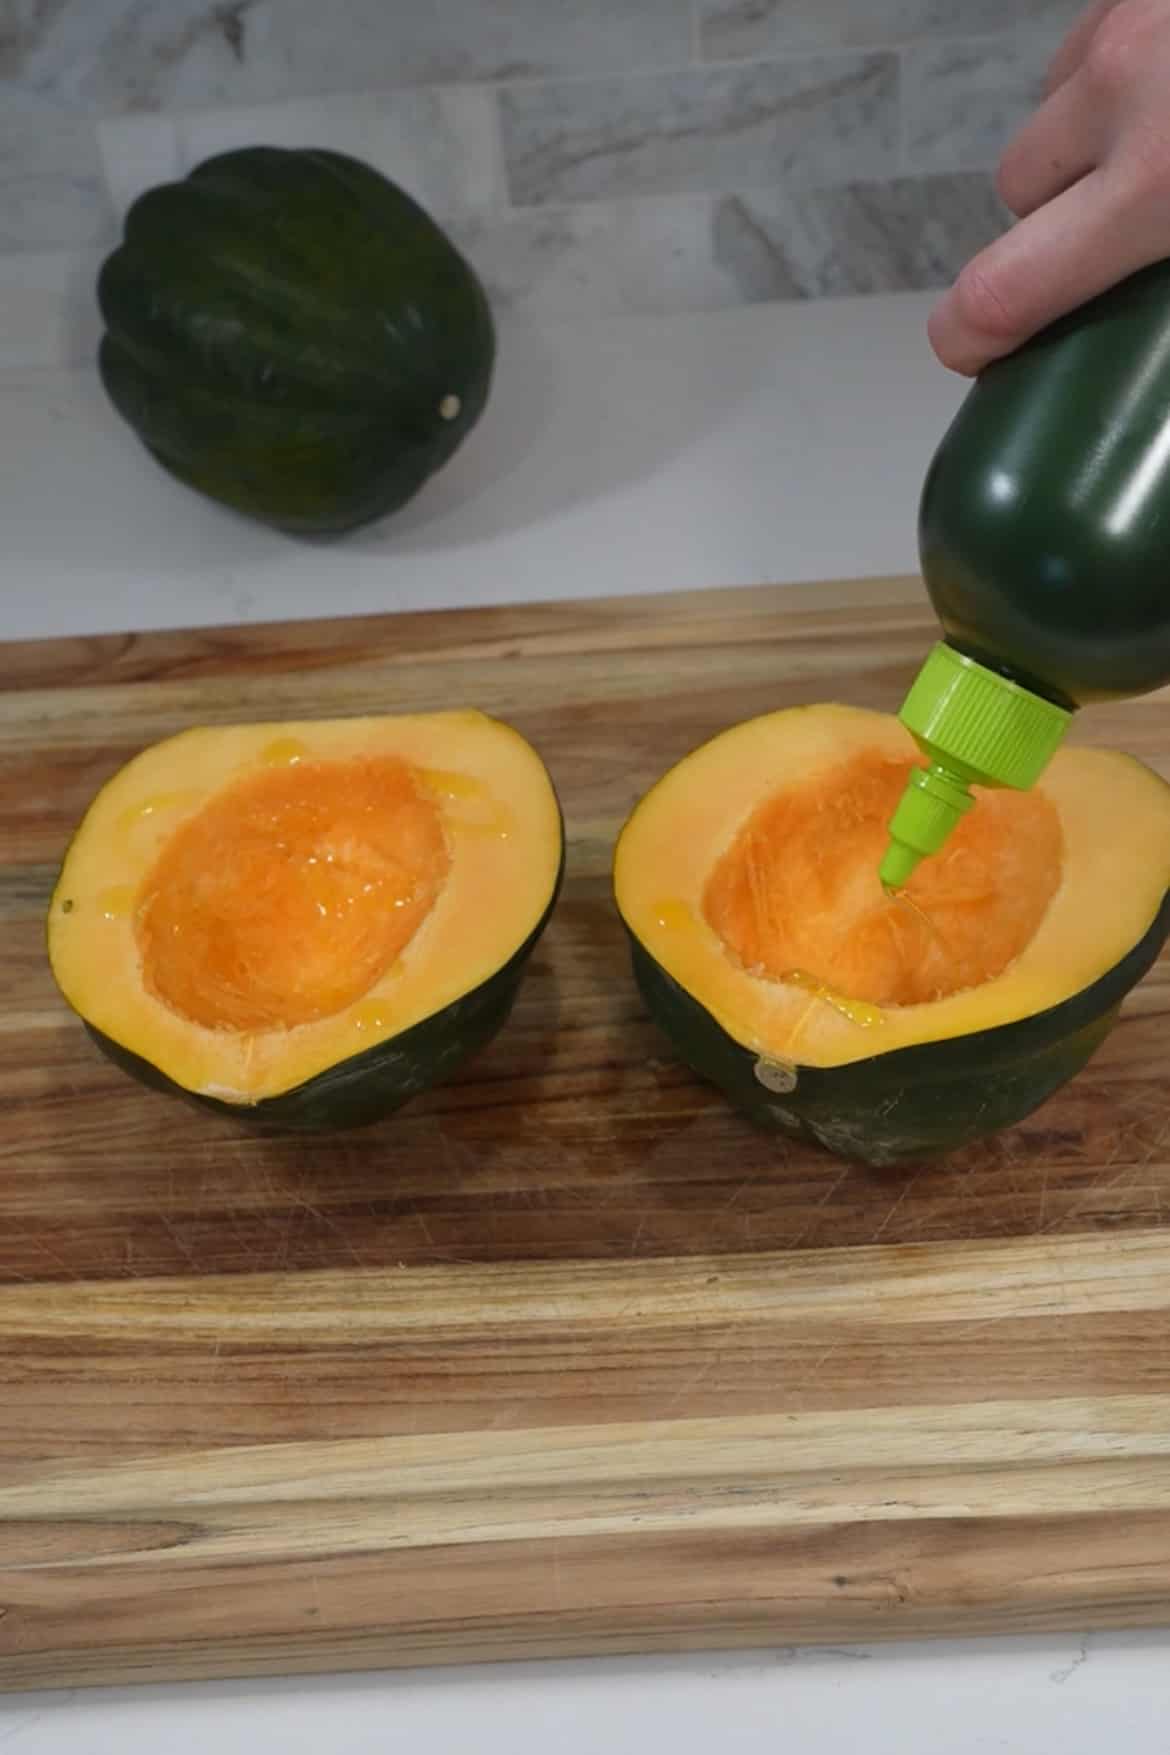 Cut the acorn squash in half horizontally and scoop out the seeds and strings. If necessary, trim a small slice off the bottom of each half to ensure they sit flat. Brush the cut sides of the squash halves with a little olive oil and season with salt and pepper.